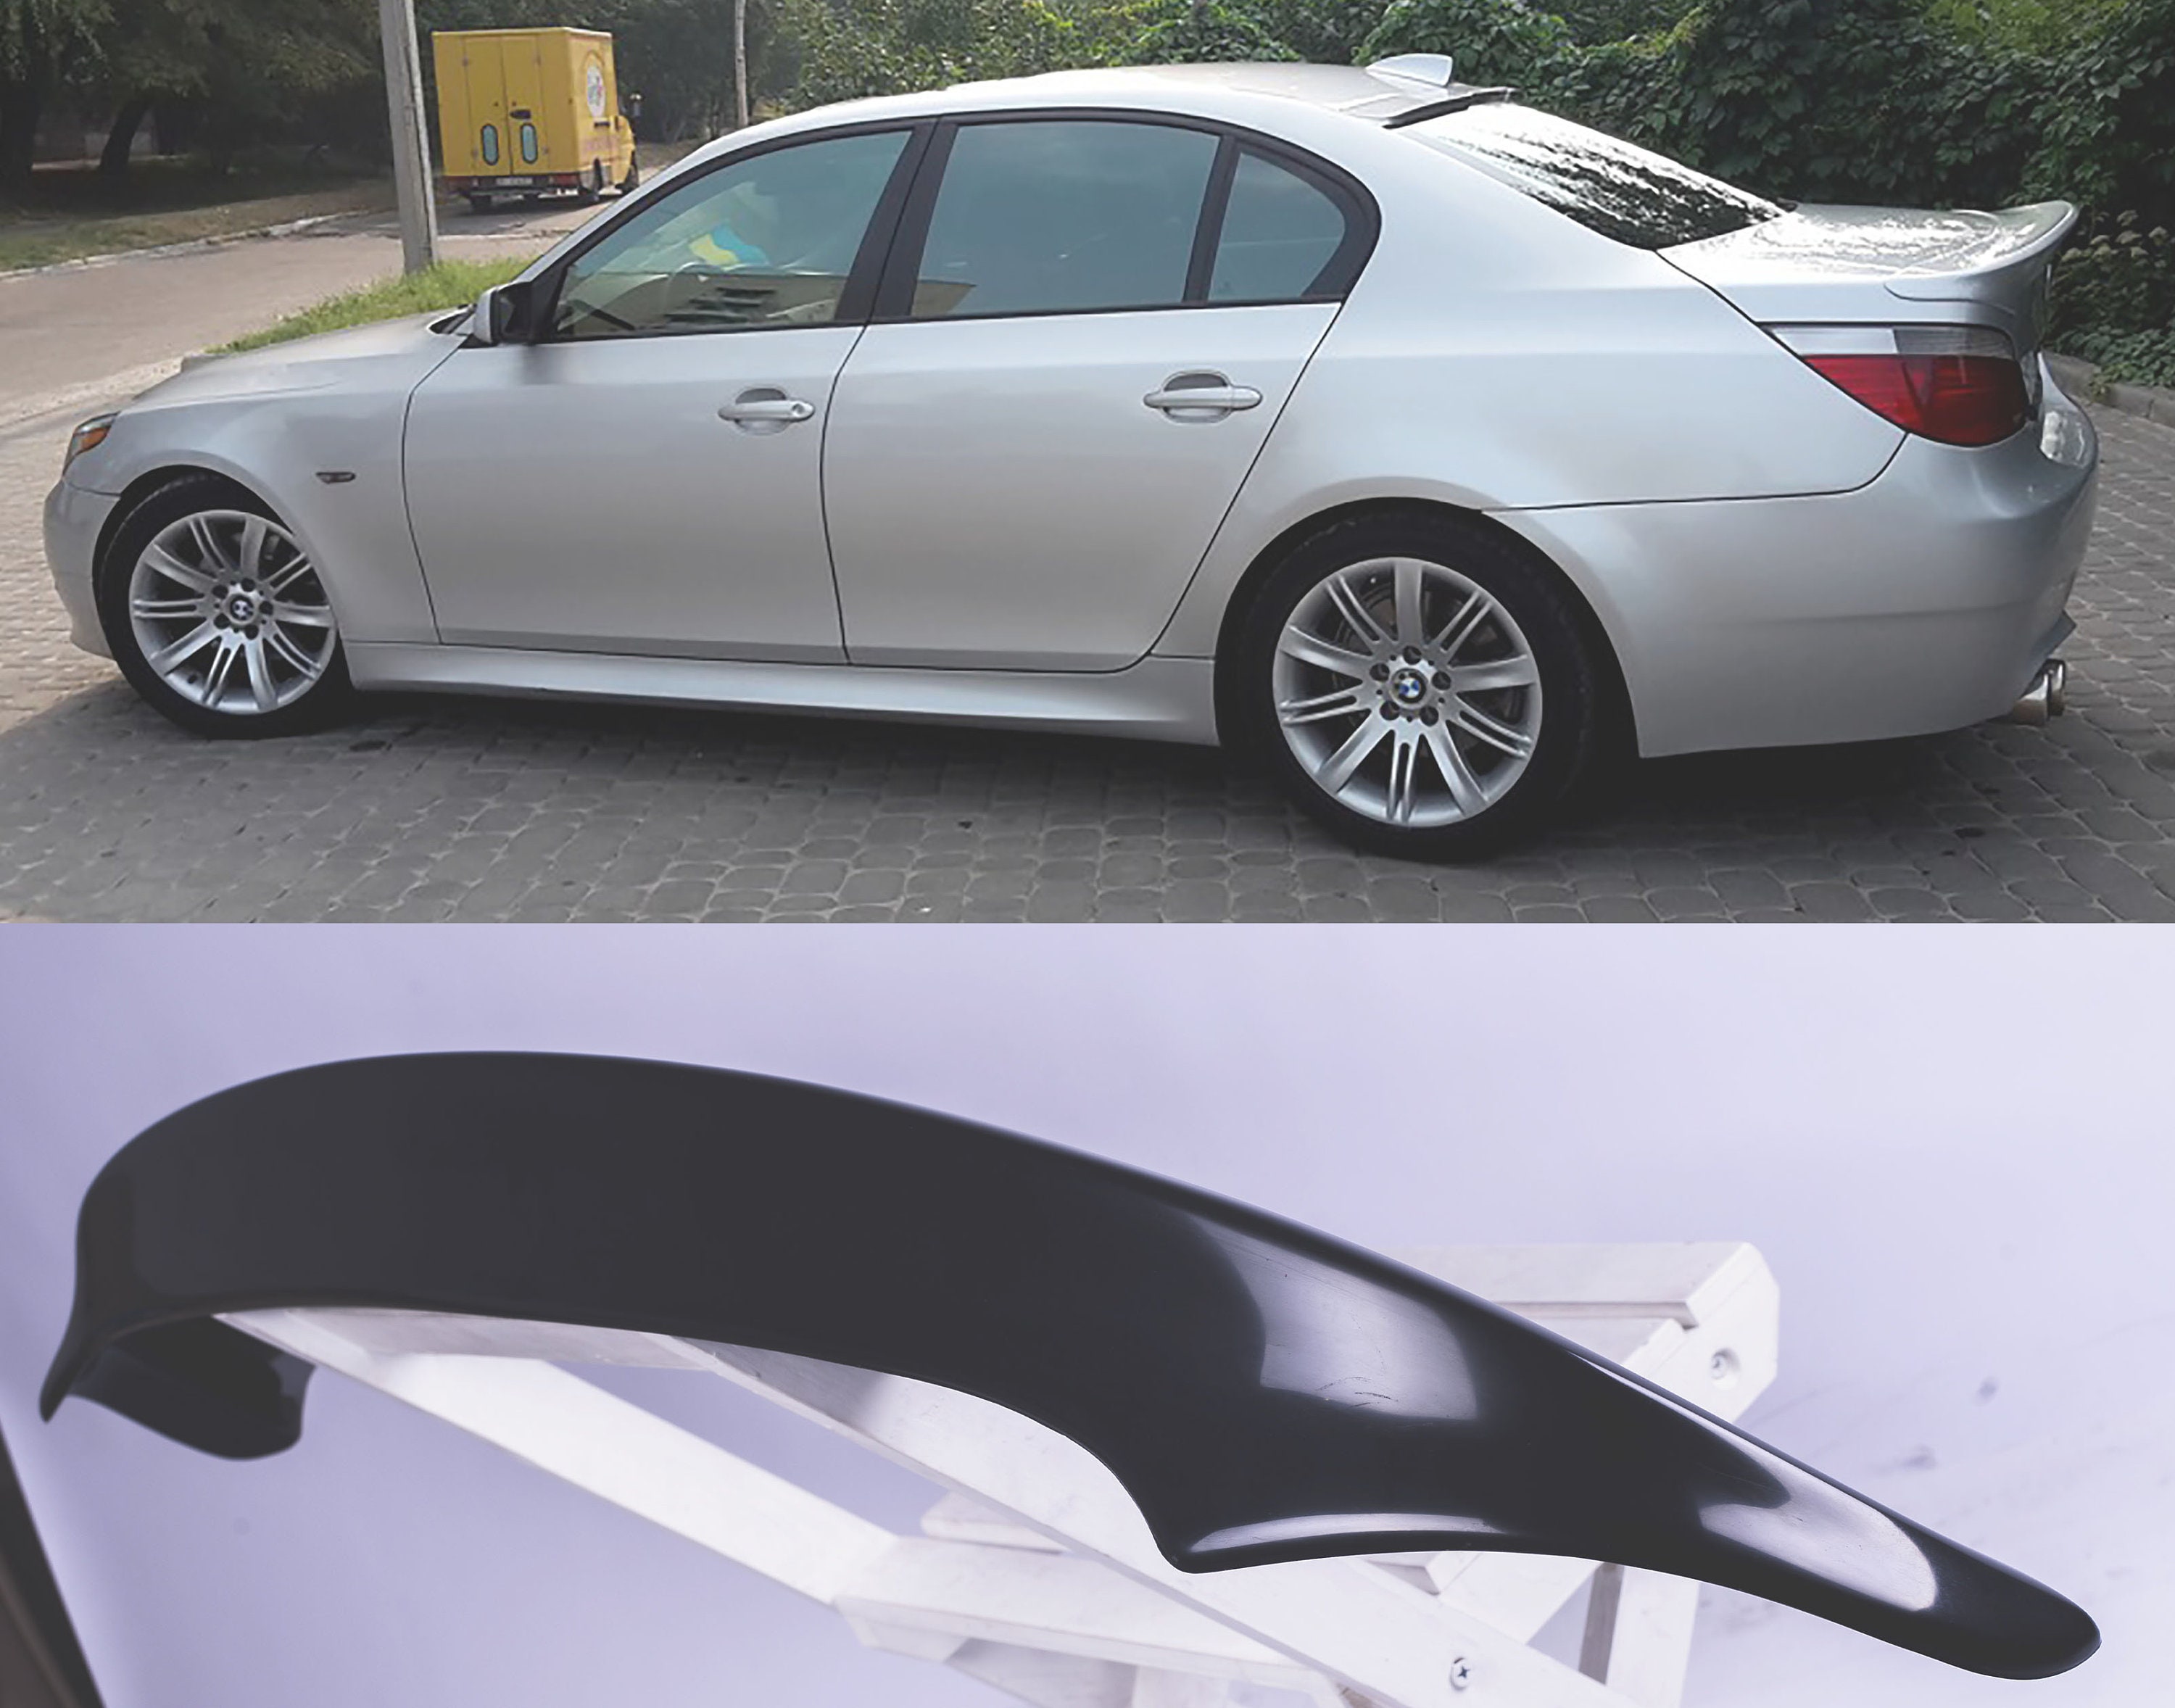 ABS Matt M SIDE SKIRTS / BLADES / Sport Side SPOILERS For BMW E60 E61 in  Blades / Addons - buy best tuning parts in  store